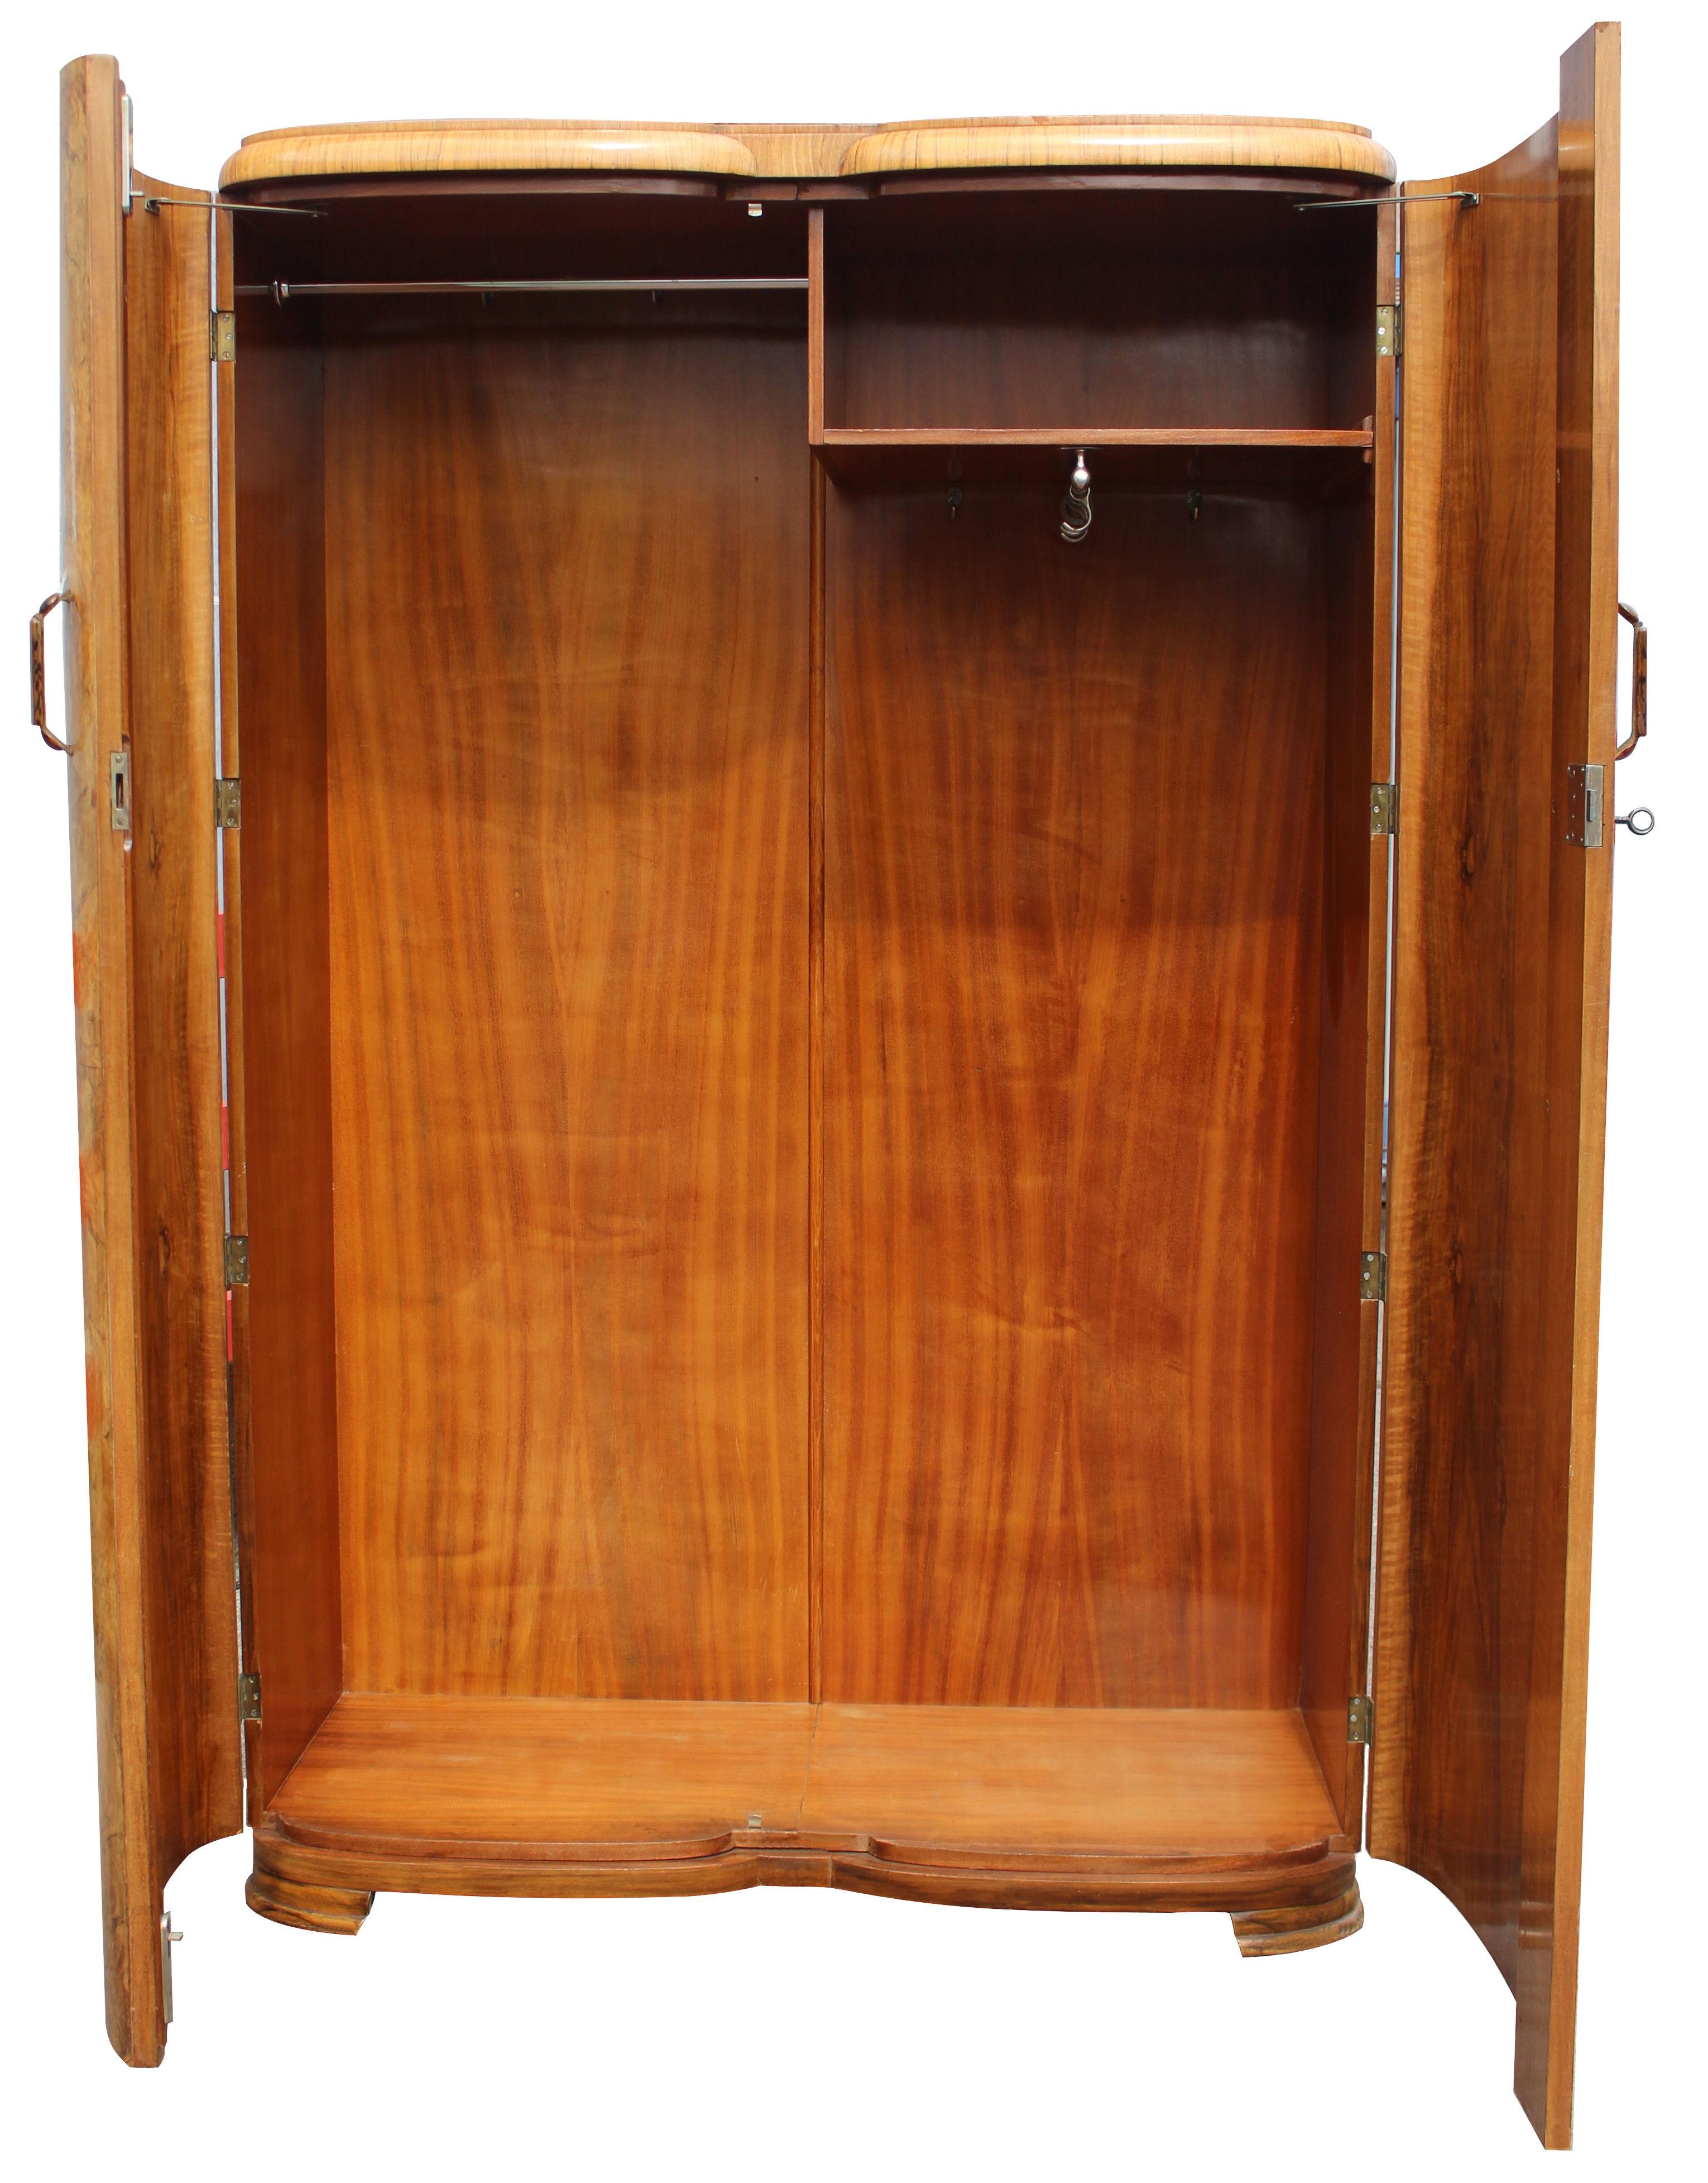 If you're looking for something spectacular for your bedroom without compromising quality and functionality then this Original Art Deco double wardrobe might just be for you. Really the pictures speak for themselves here, the doors and the figuring